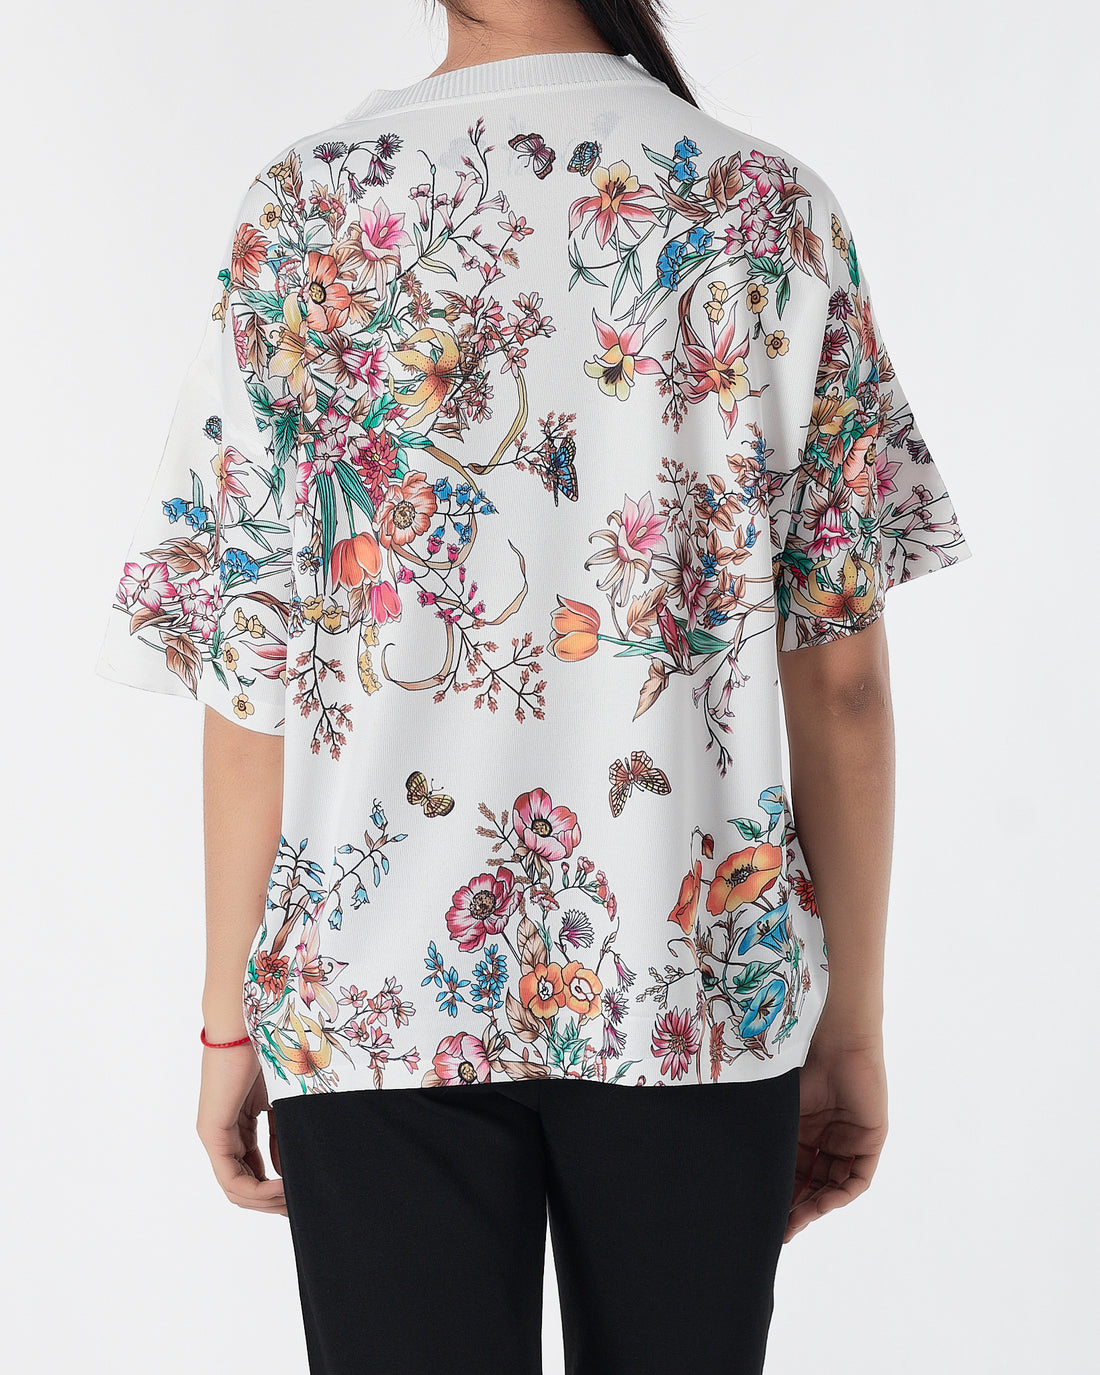 Floral Over Printed Lady Polo Shirt 15.90